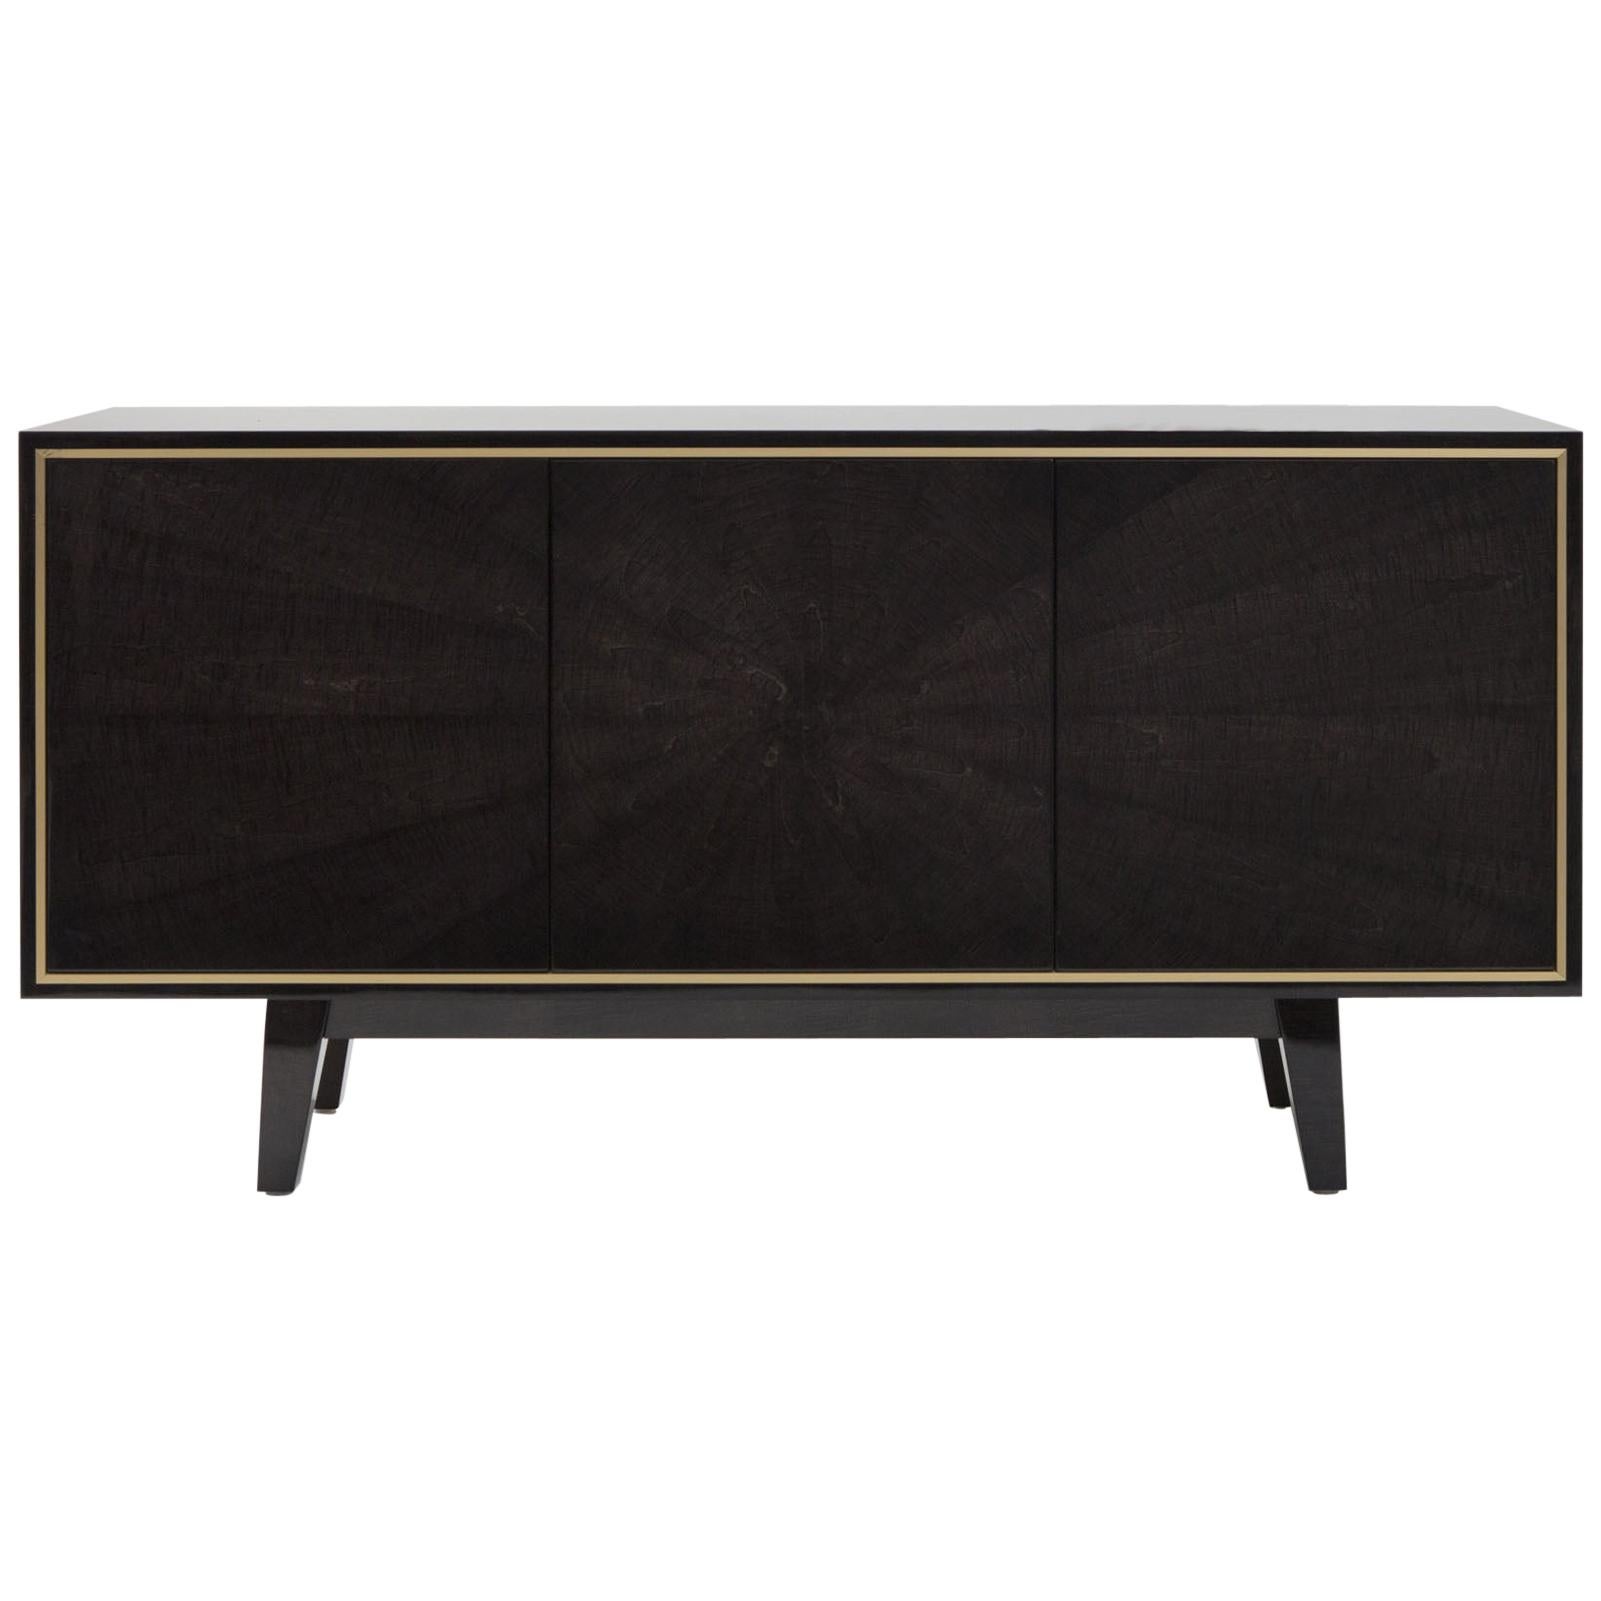 Davidson's Contemporary, Corinthia Side Cabinet in Sycamore Black and Brass 